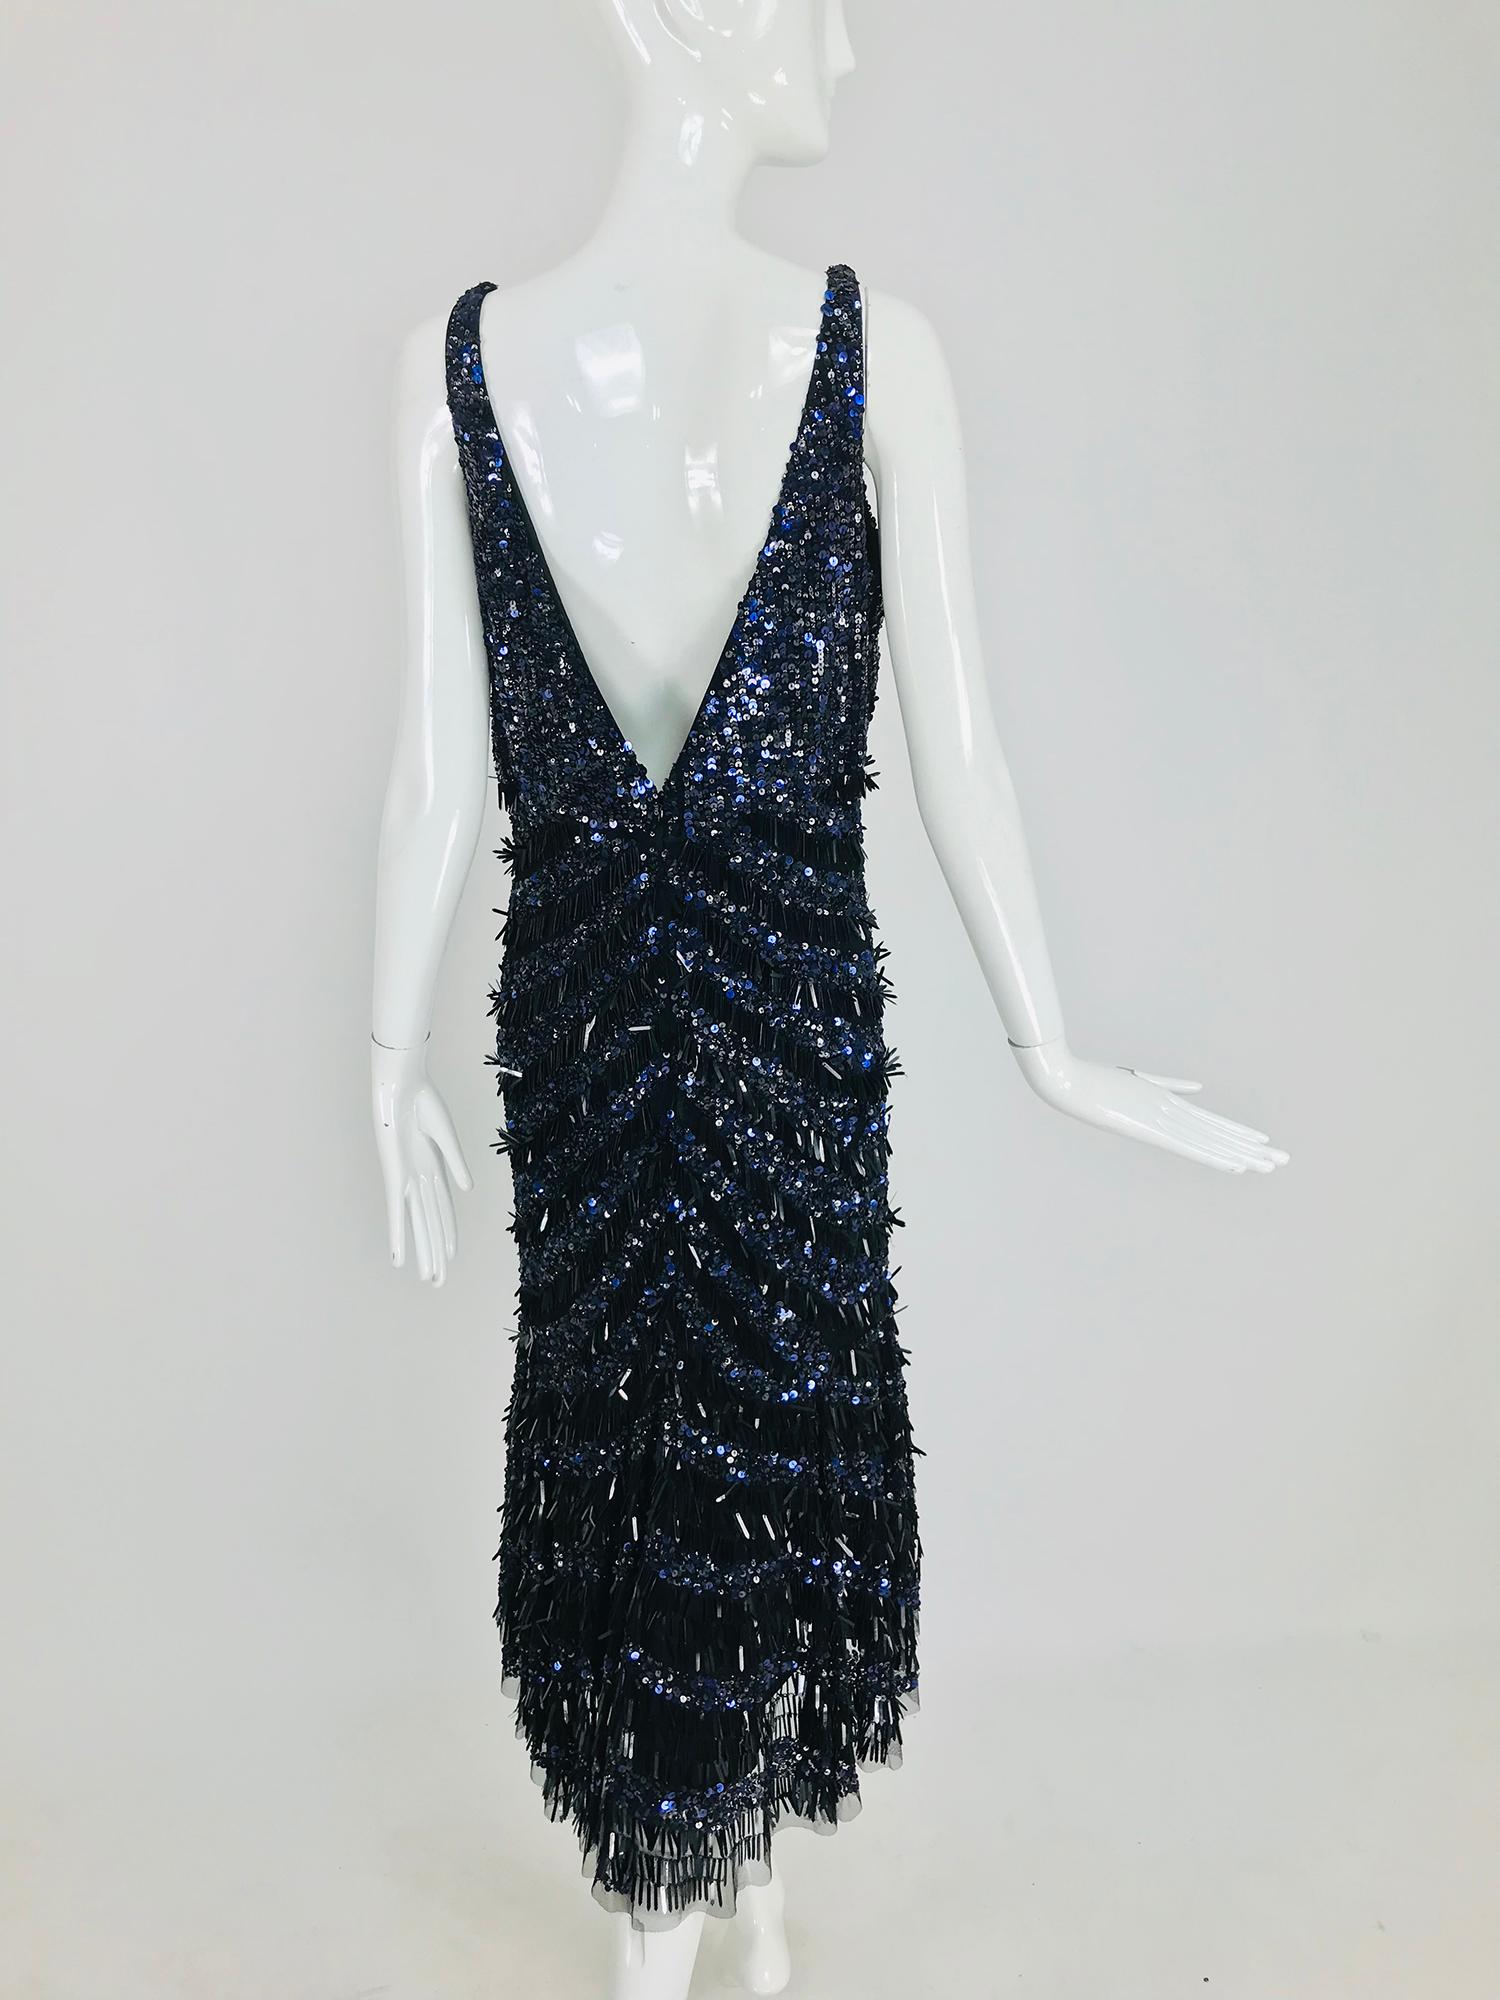 Theia Sequin Evening Cocktail Dress in Black and Blue 12 4